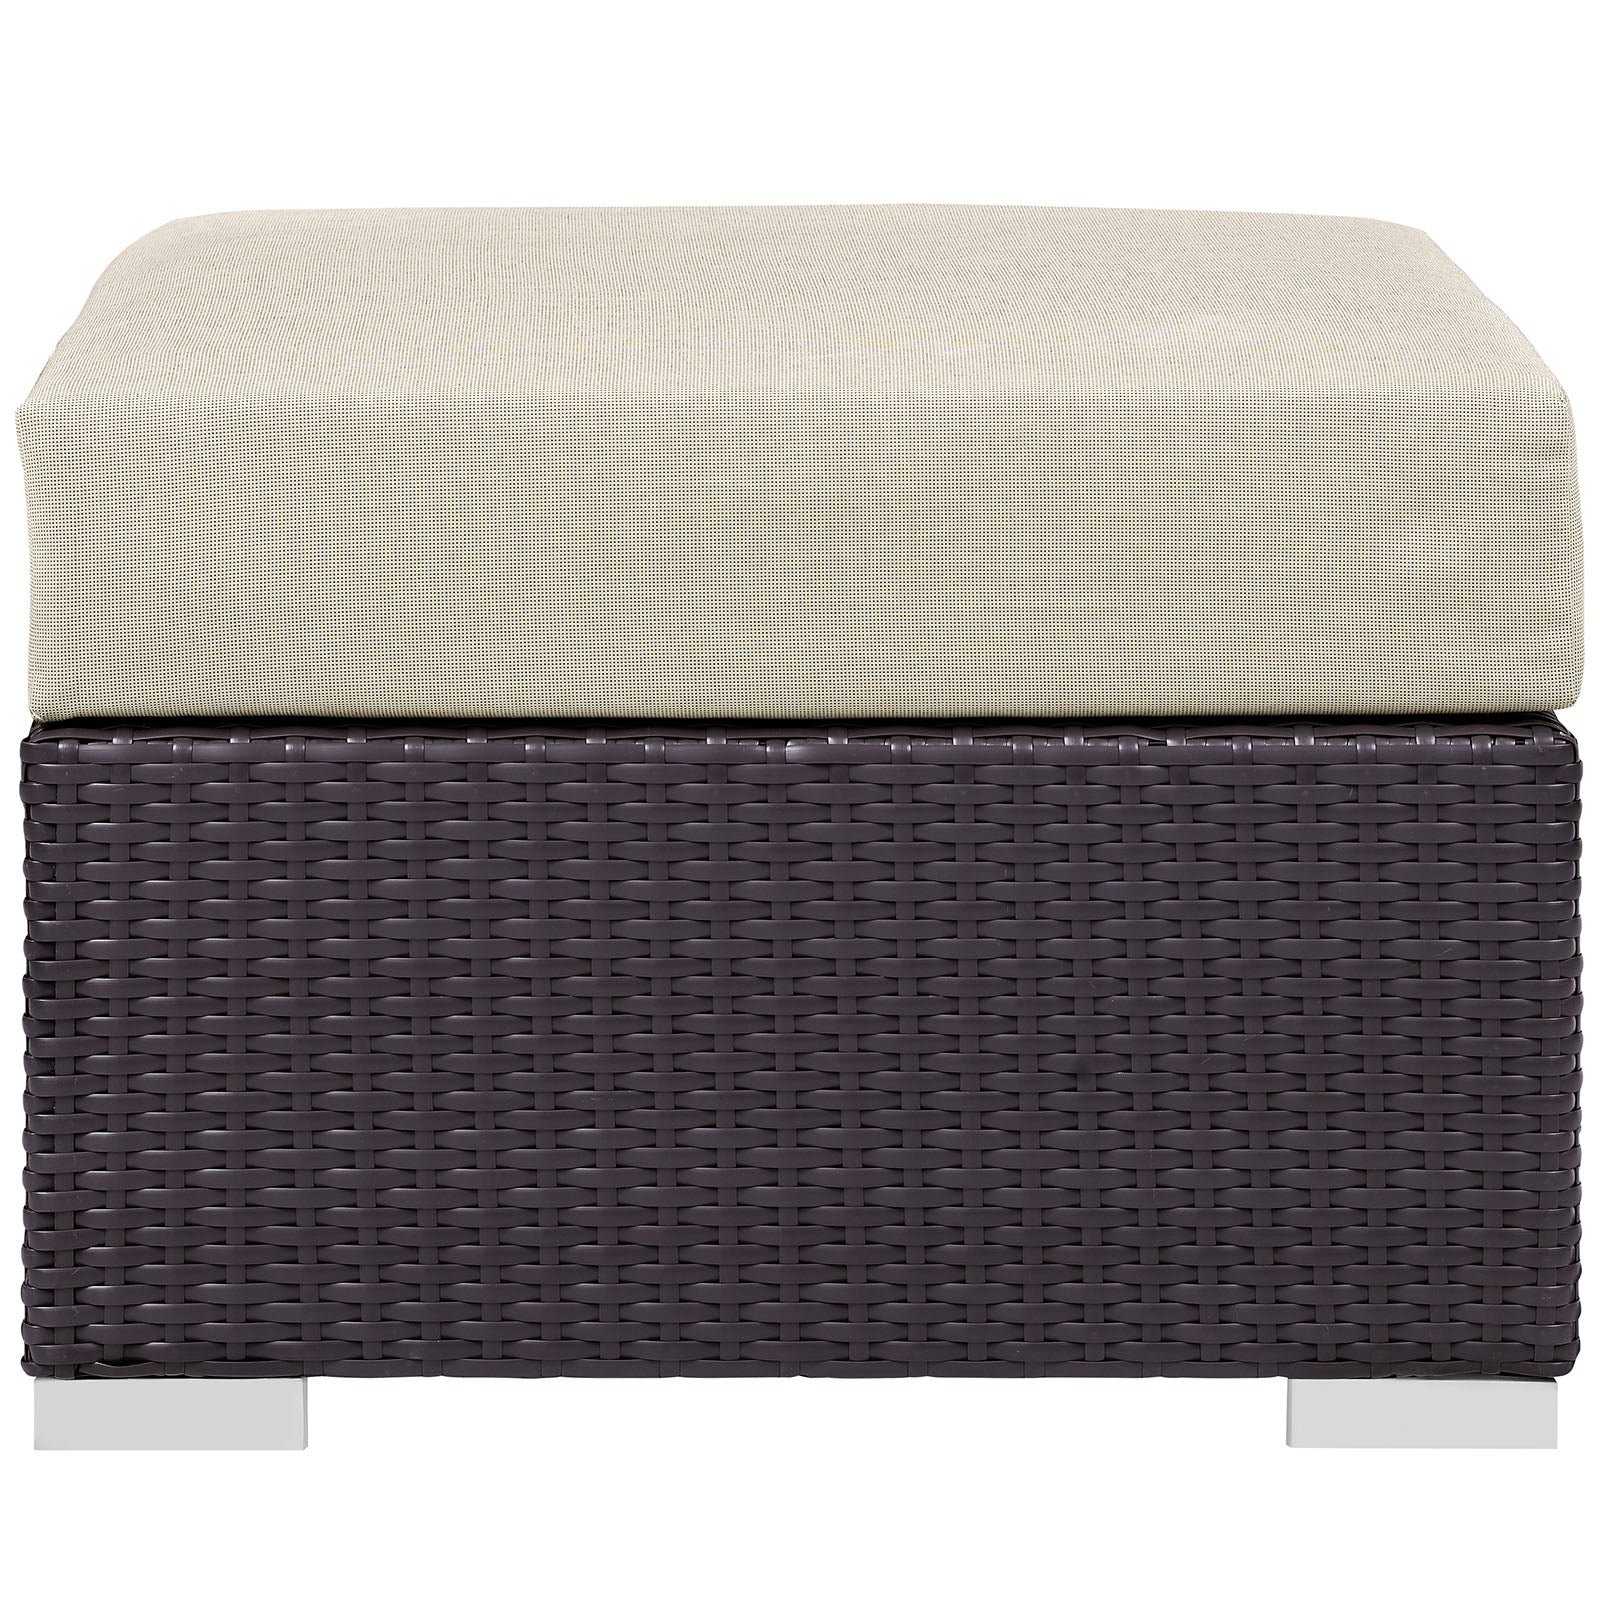 Modway Outdoor Stools & Benches - Convene Outdoor Patio Fabric Square Ottoman Espresso Beige